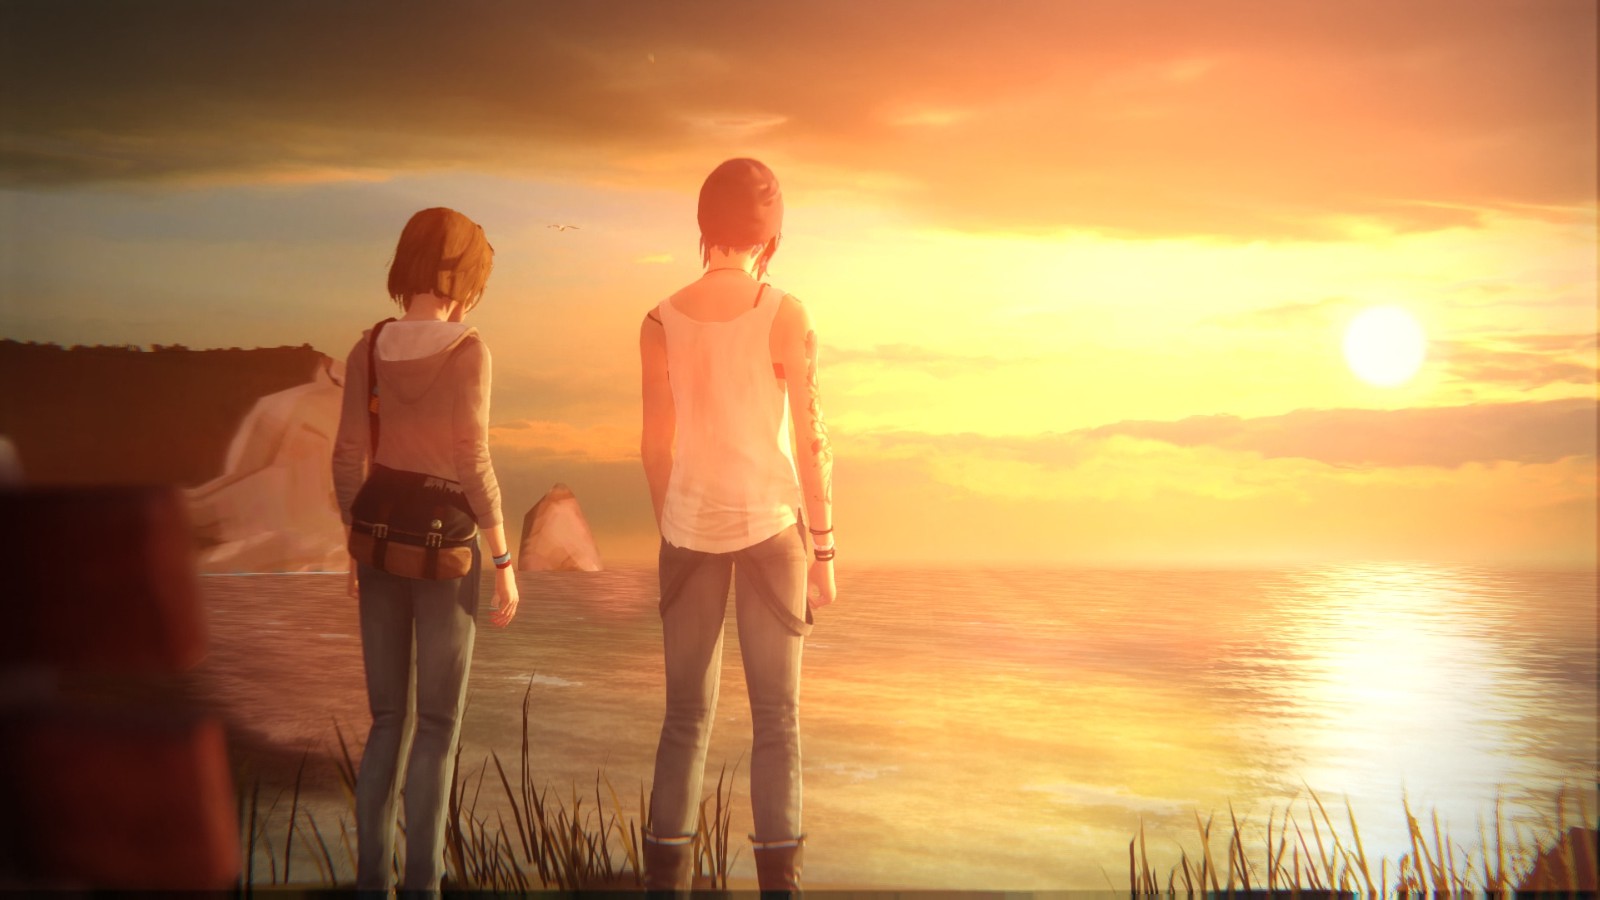 life is strange arcadia bay collection download